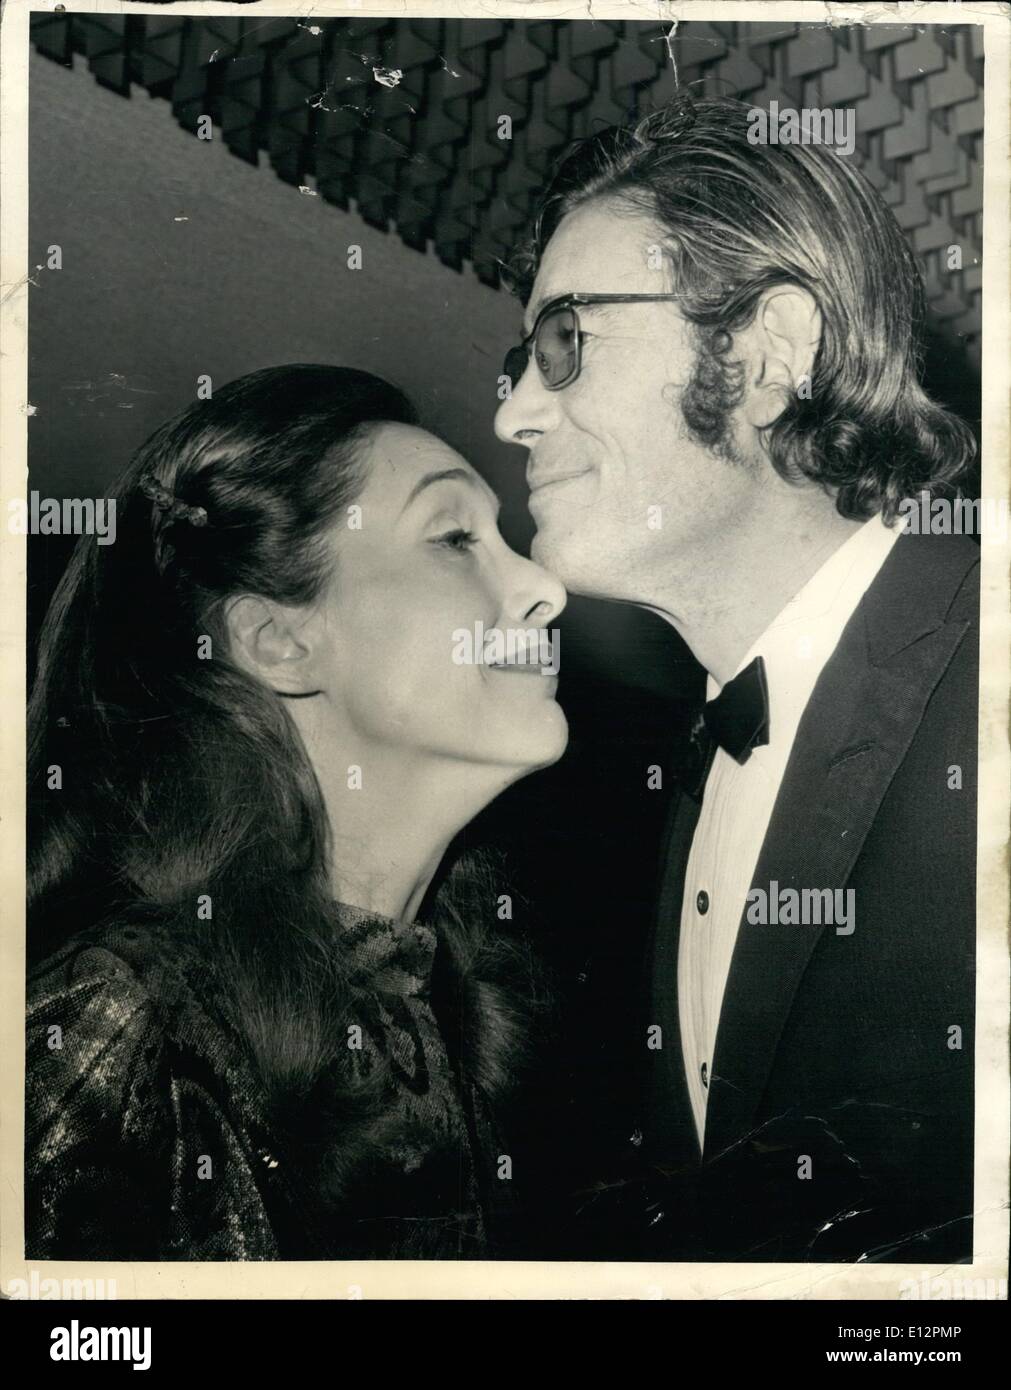 Feb. 24, 2012 - Murphy's War Premiere in London: Actor Peter O'Toole, kisses his wife, actress Sian Phillips During the Royal Charity Premiere of ''Murphy's War'' Held at the Odeon,Leicester Square, London, this evening, January 13. H.R.H. Princess Alexandra attend the Premiere which was held in Ain of the Royal Commonwealth Society for the blind. The film star Peter O'Toole, Sian Phillips French actor Philippe Noiret and Germany's Horst Janson in the Principal roles. Stock Photo